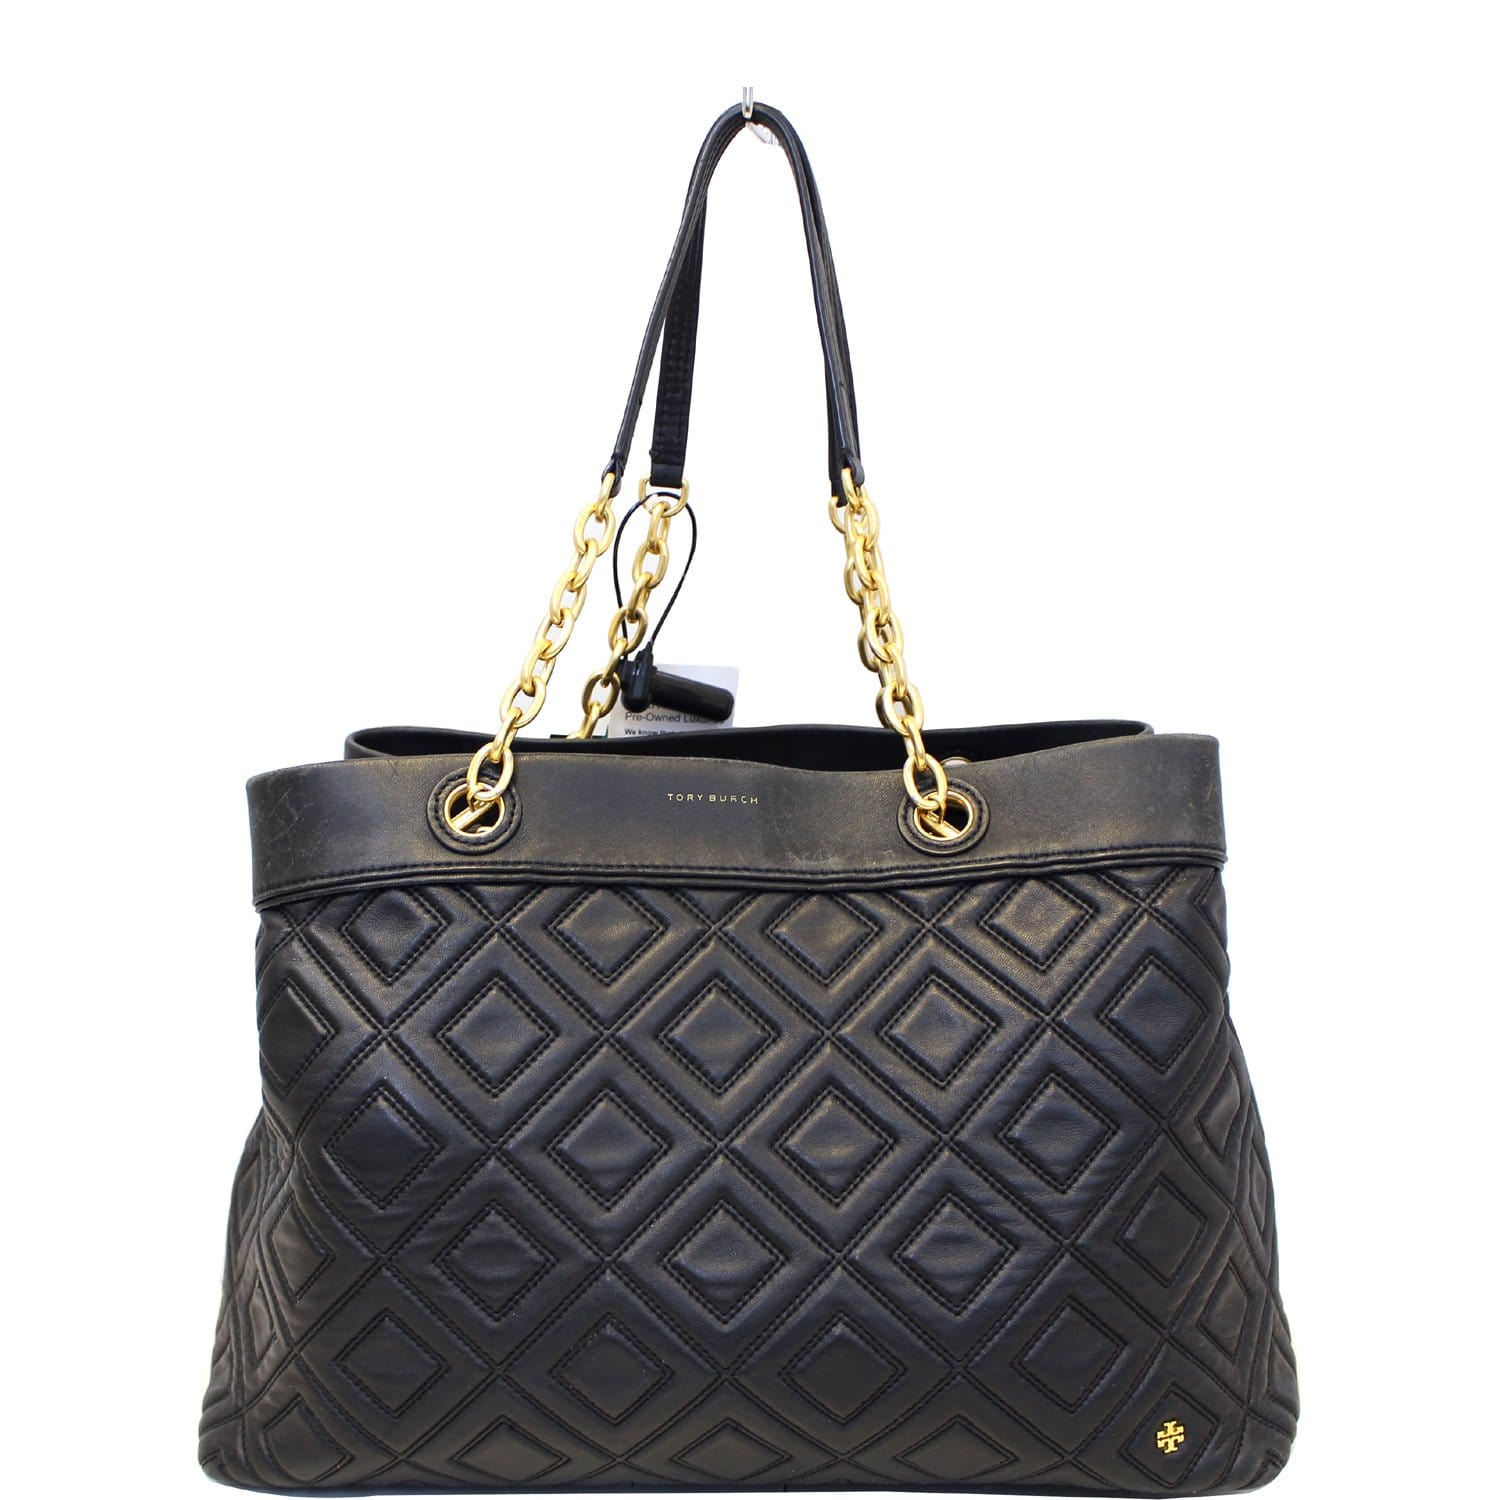 Sold at Auction: Tory Burch Black Leather Tote Handbag / Purse